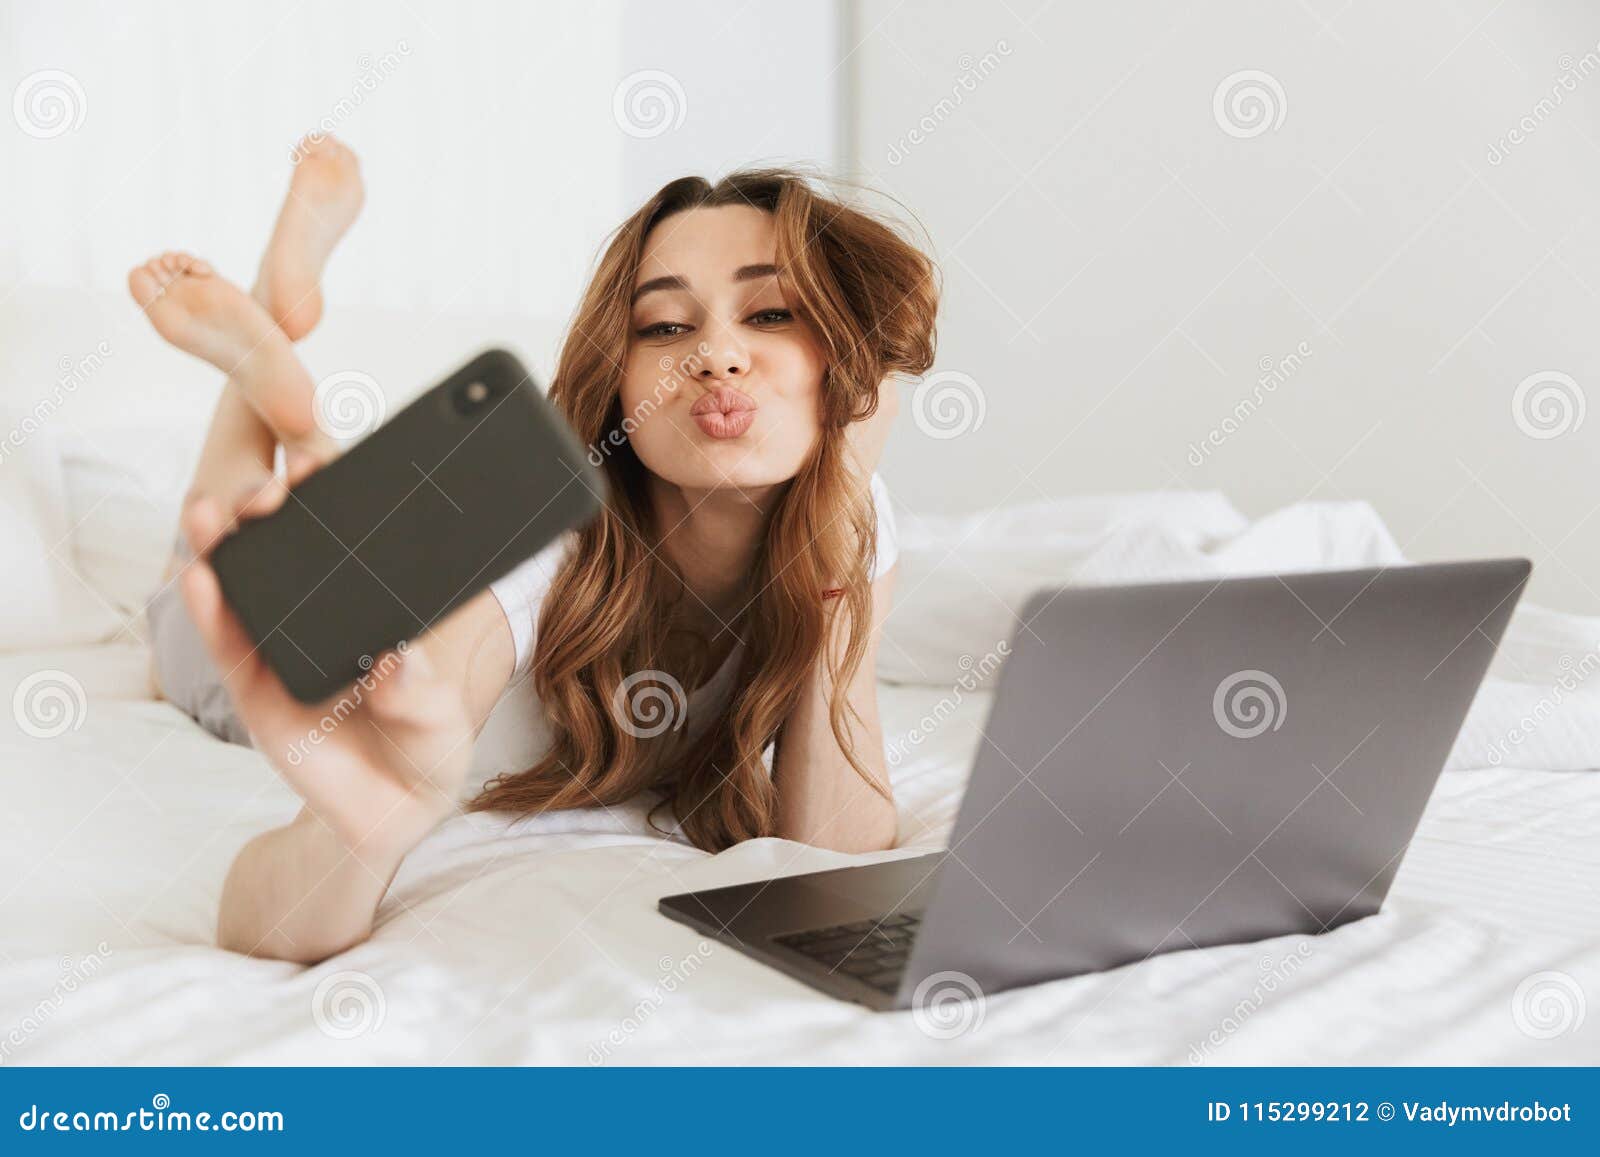 Portrait of a Beautiful Young Woman Taking Selfie Stock Photo - Image